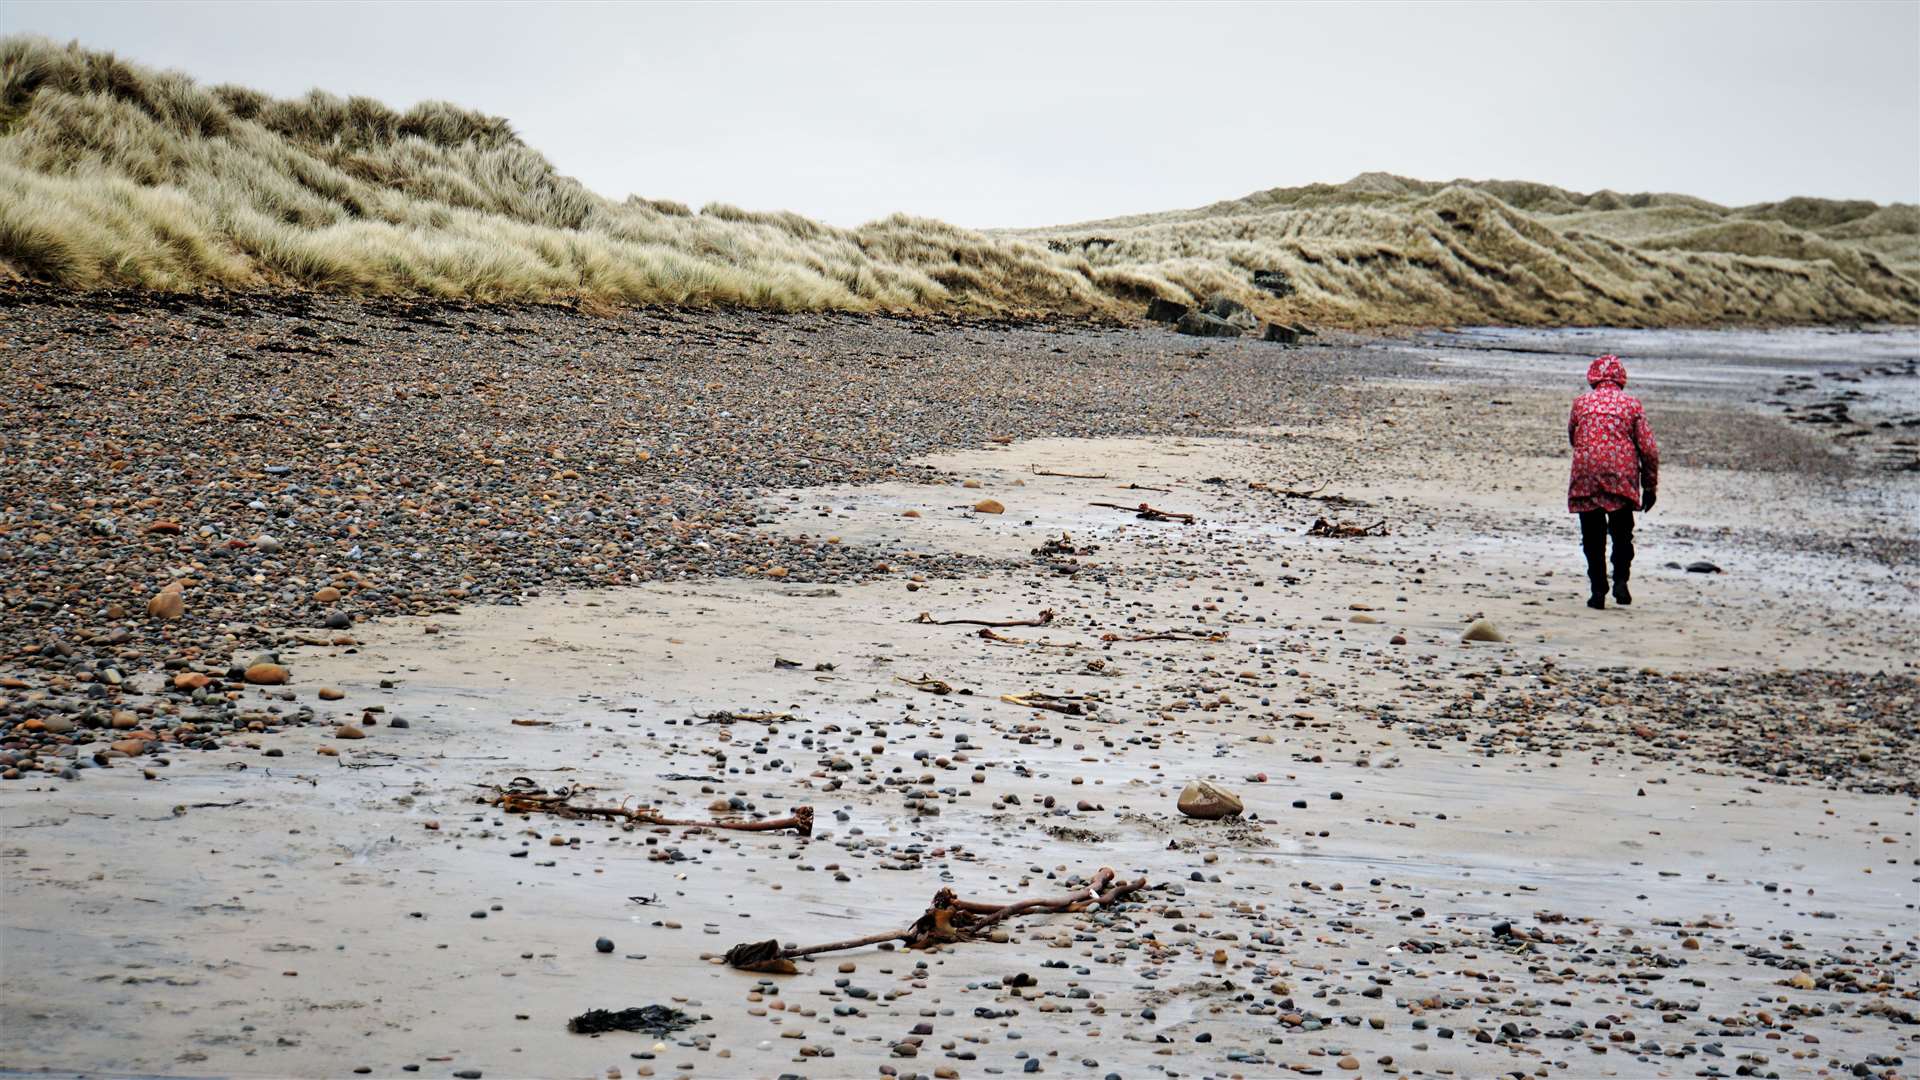 Dunnet beach where the barrel was washed in is popular with locals and tourists alike. A German couple also found what they think could be a human leg bone there and this is being investigated by the police. Picture: DGS